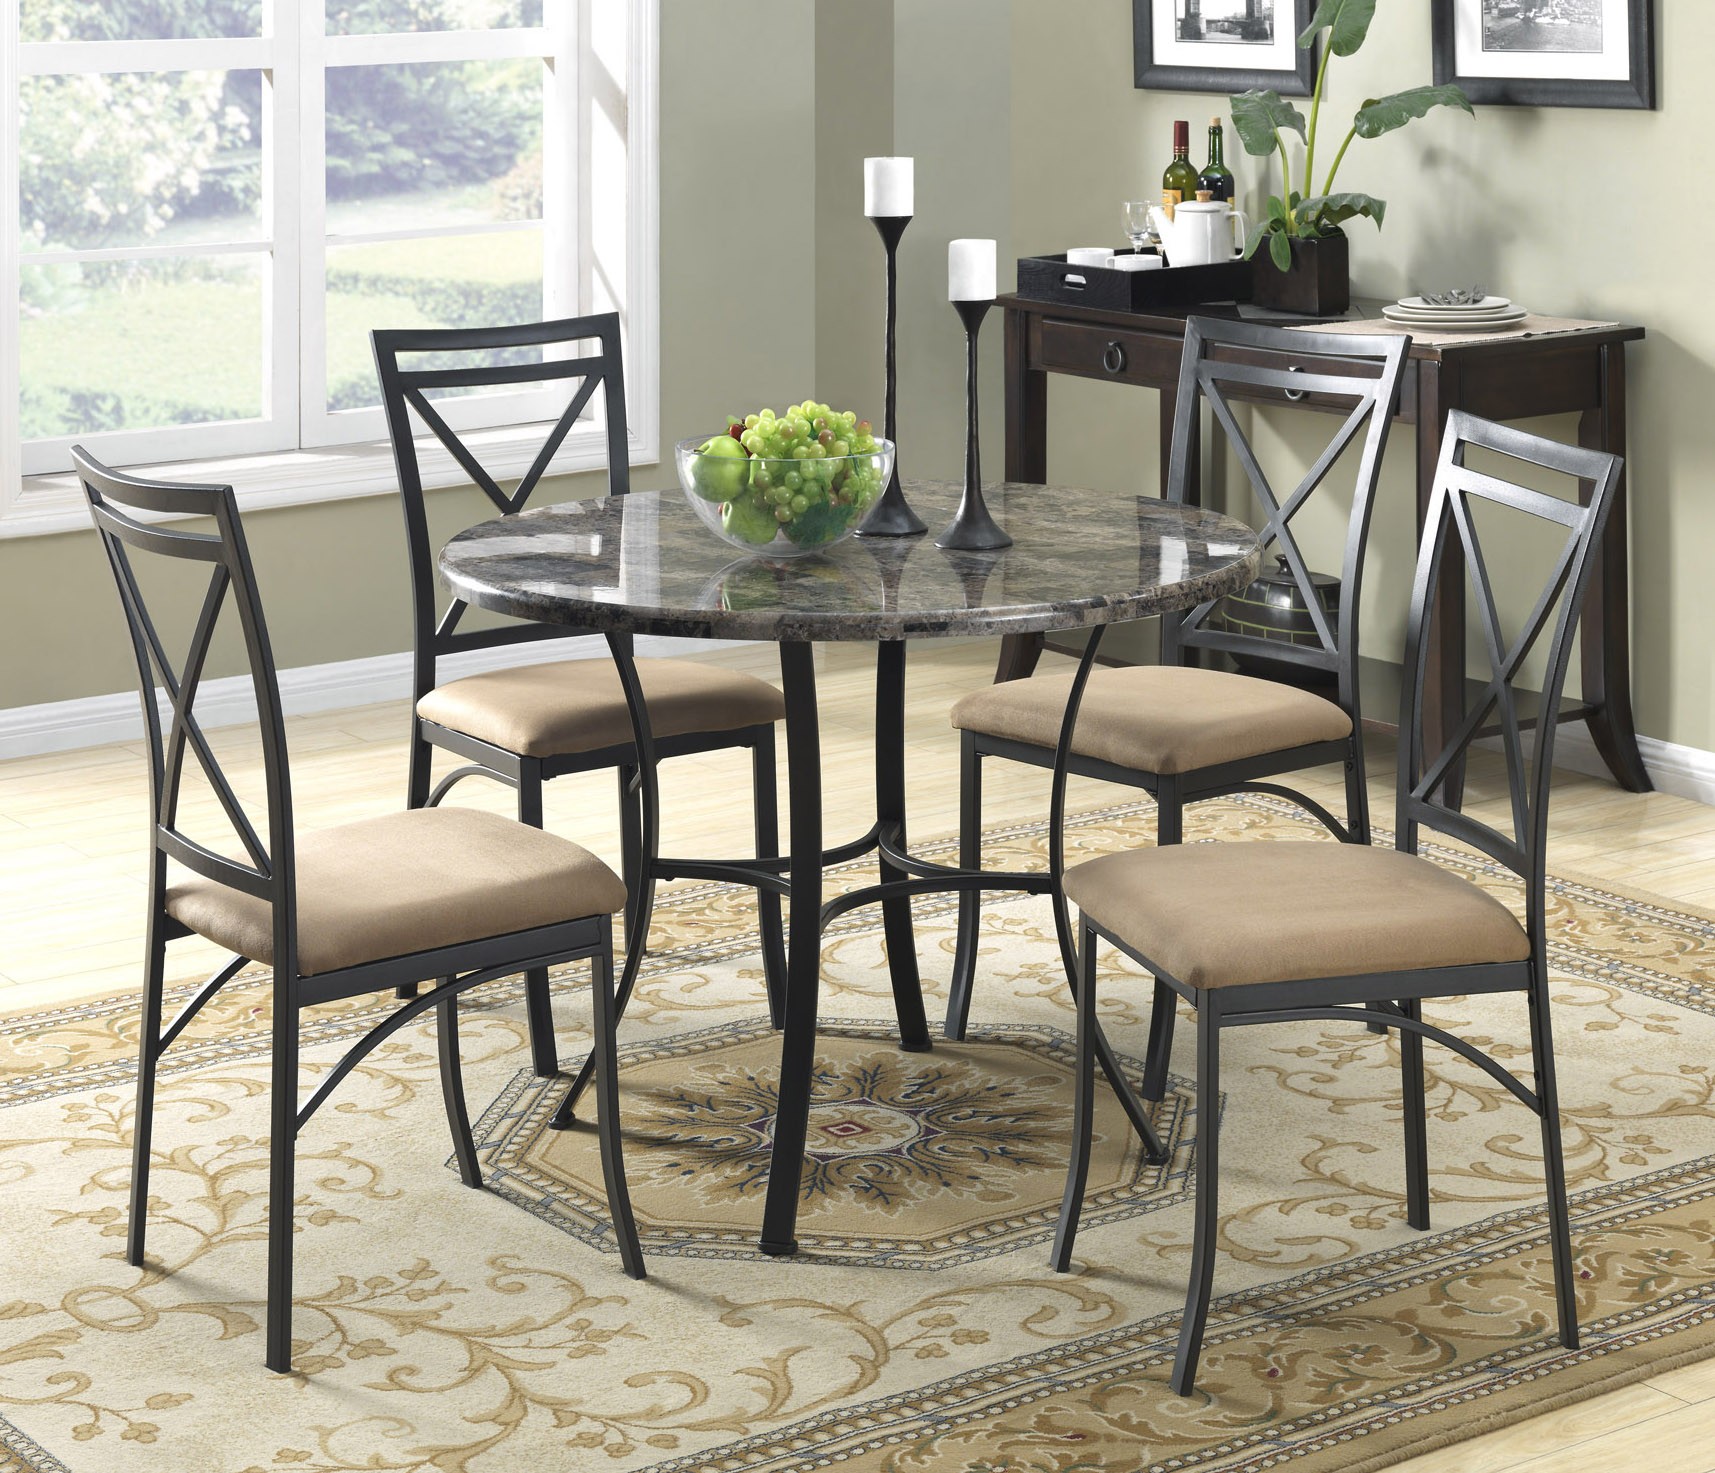 Mainstays 5-Piece Faux Marble Top Dining Set - image 4 of 7